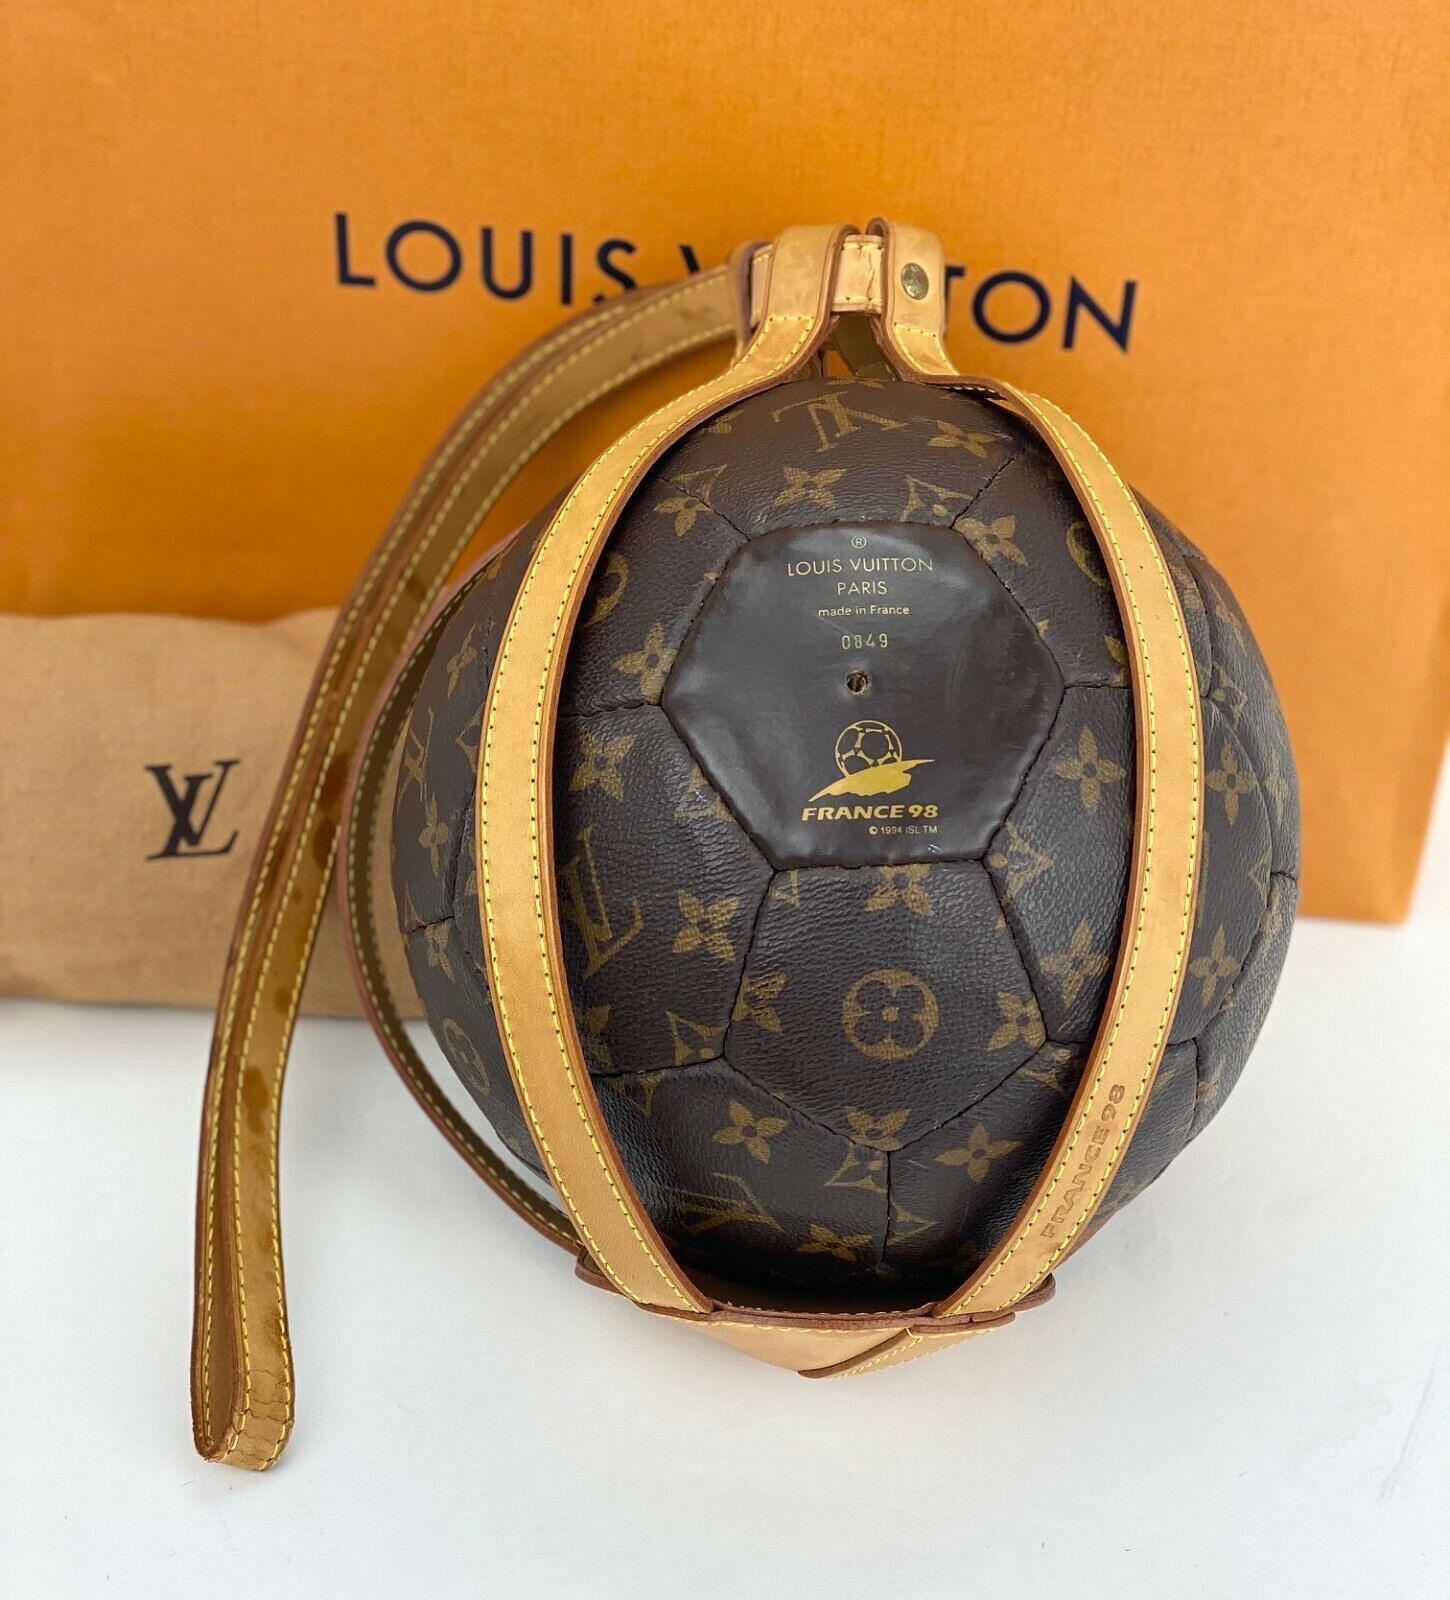 We need Virgil back: Louis Vuitton fortune cookie bag price sparks  hilarious reactions online